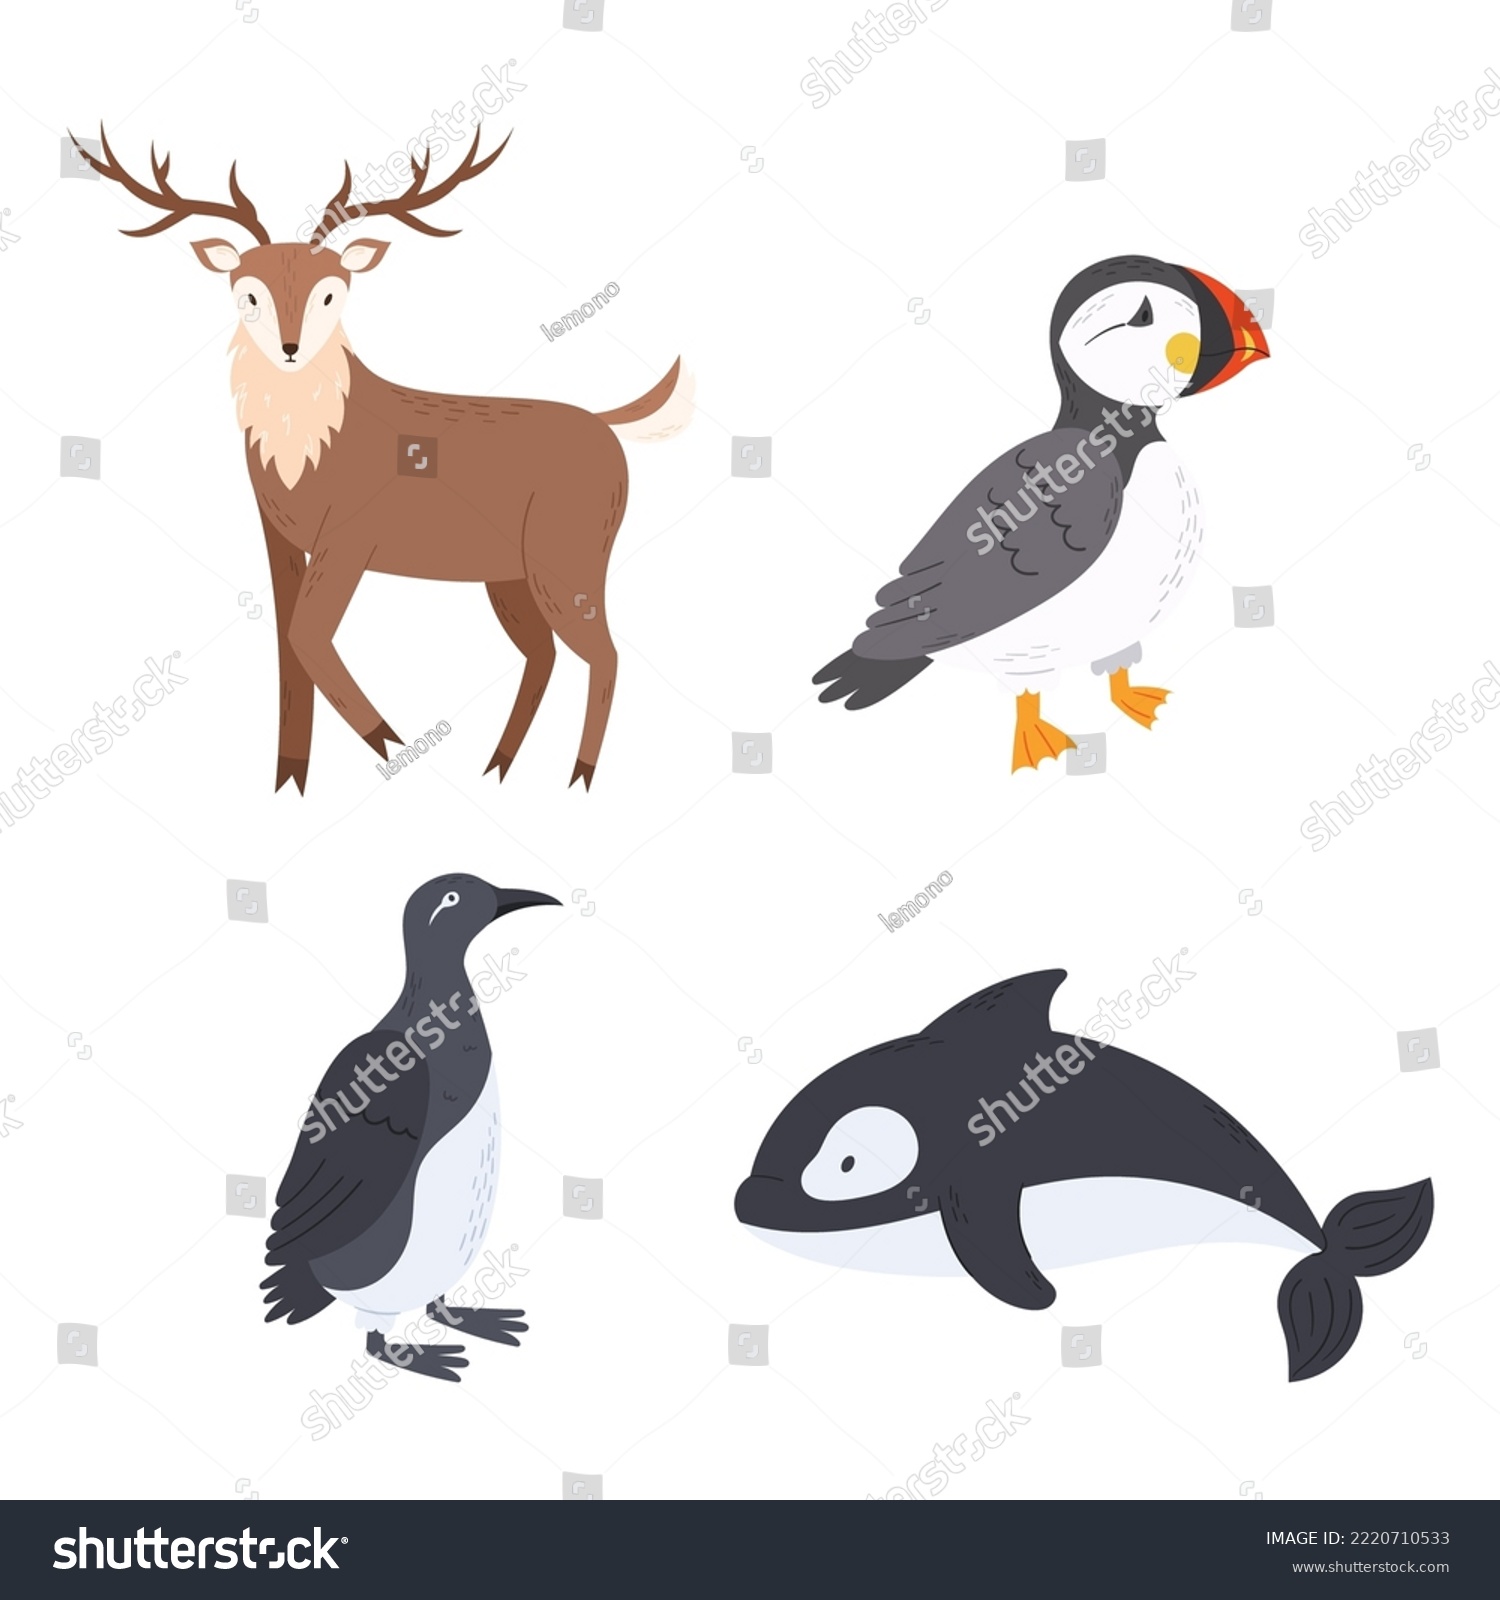 SVG of Set Of Arctic Animals Reindeer, Atlantic Puffin Or Sea Parrot And Penguin Birds With Killer Whale Wildlife Creatures, North Pole Animals Isolated On White Background. Cartoon Vector Illustration svg